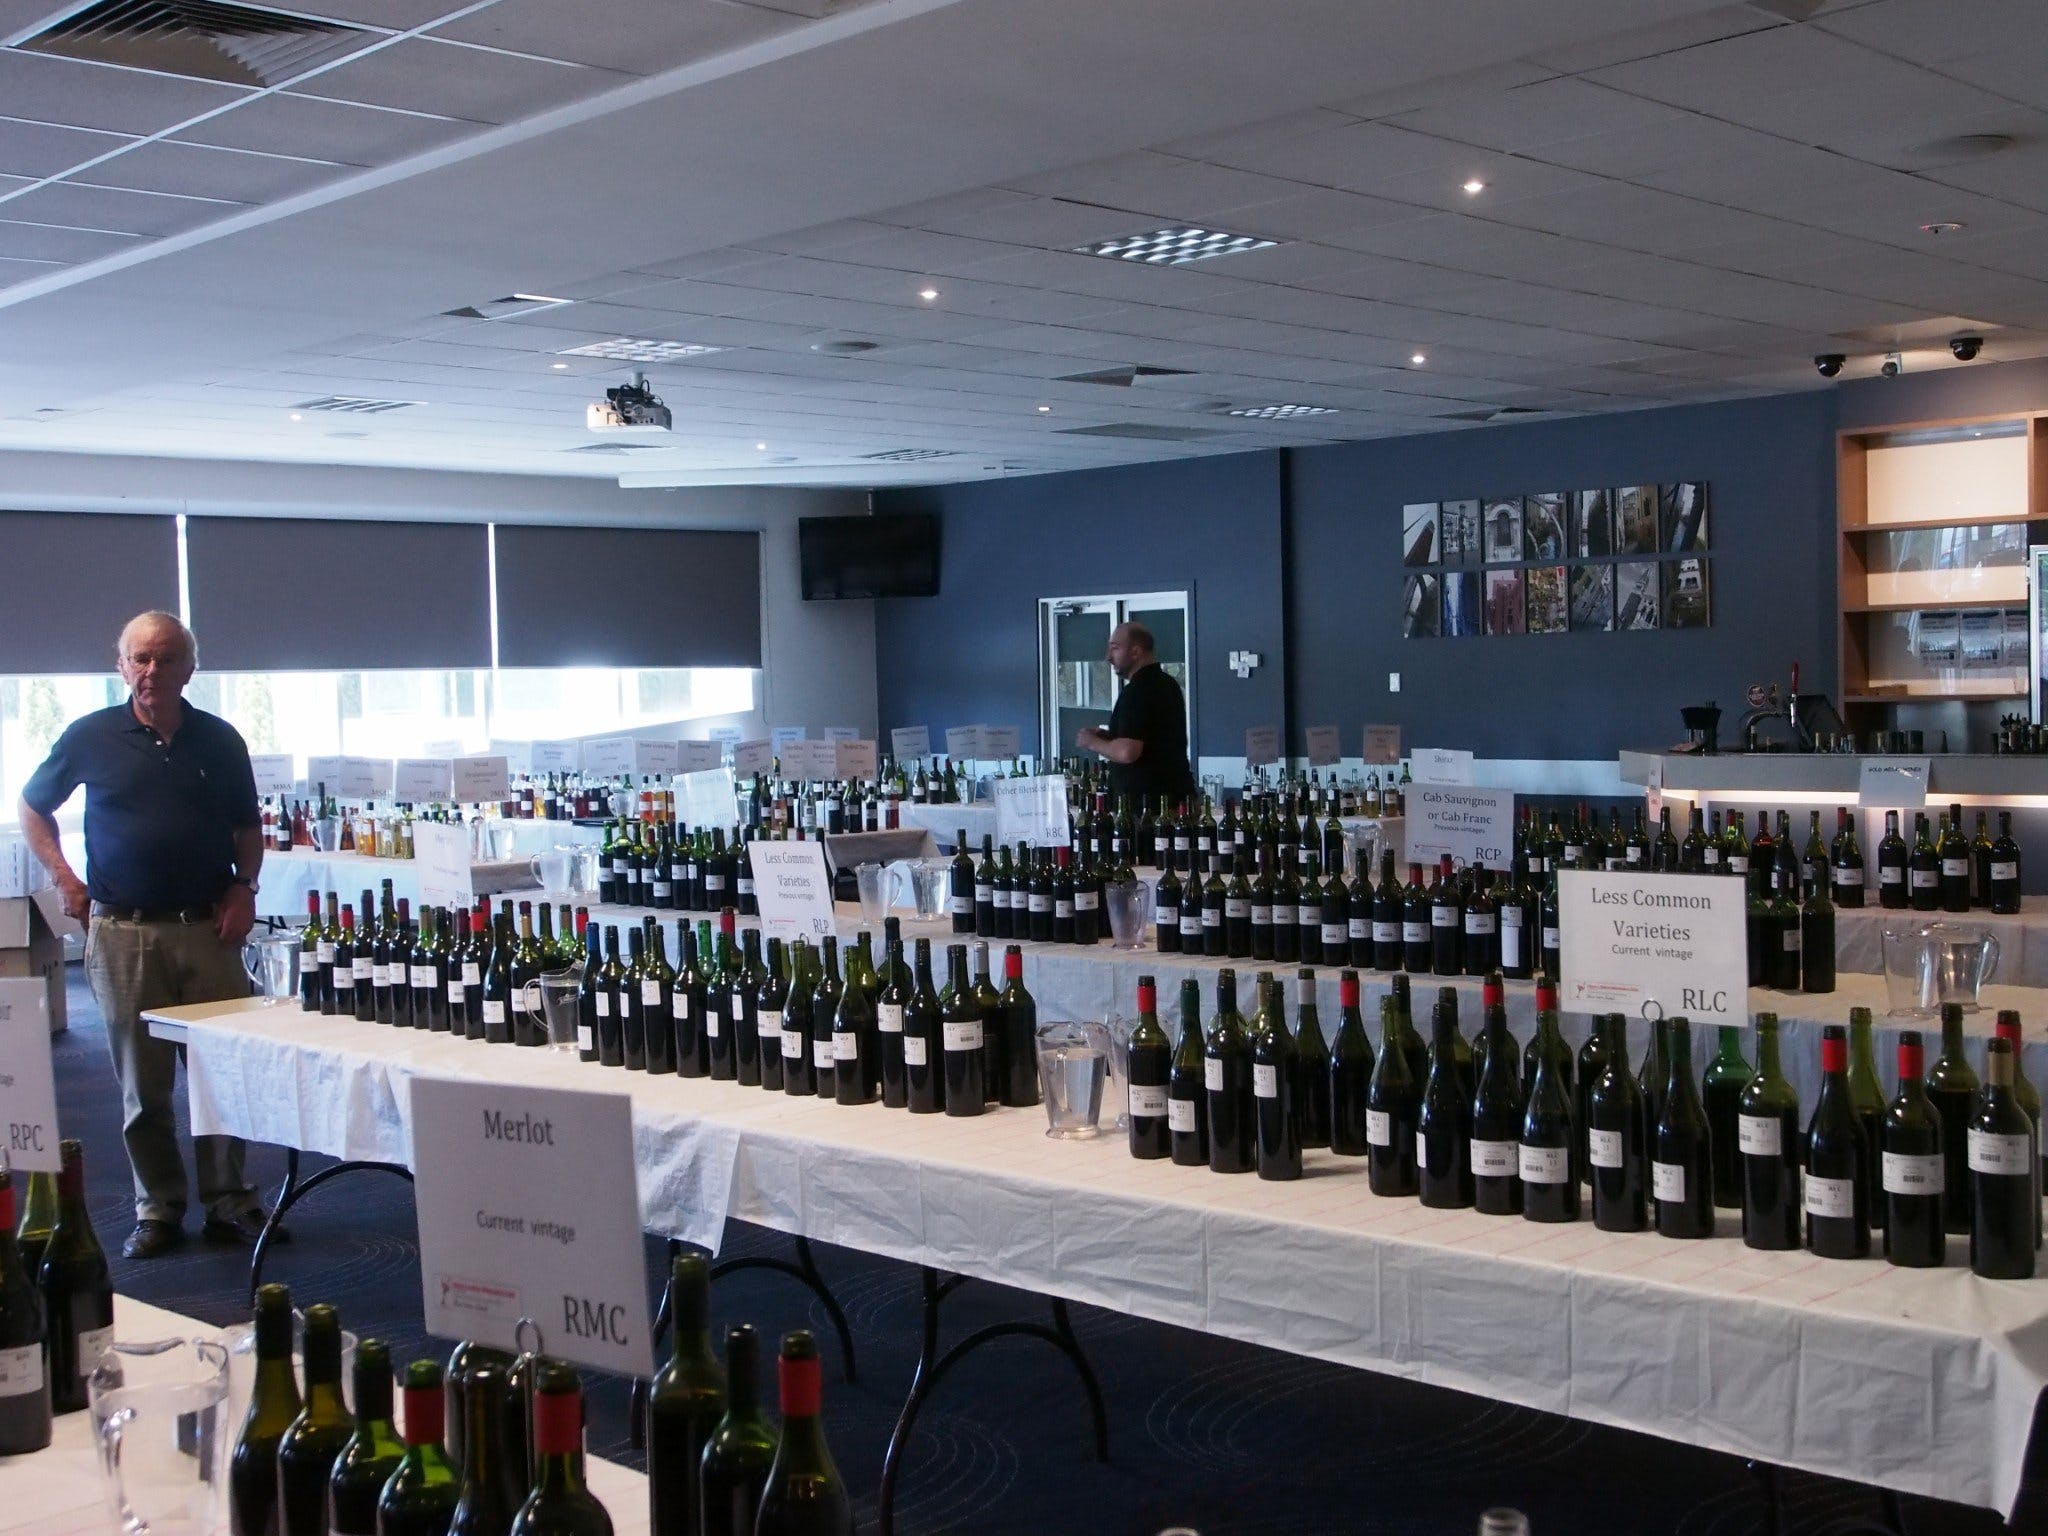 Eltham and District Wine Guild Annual Wine Show - 51st Annual Show - Melbourne Tourism